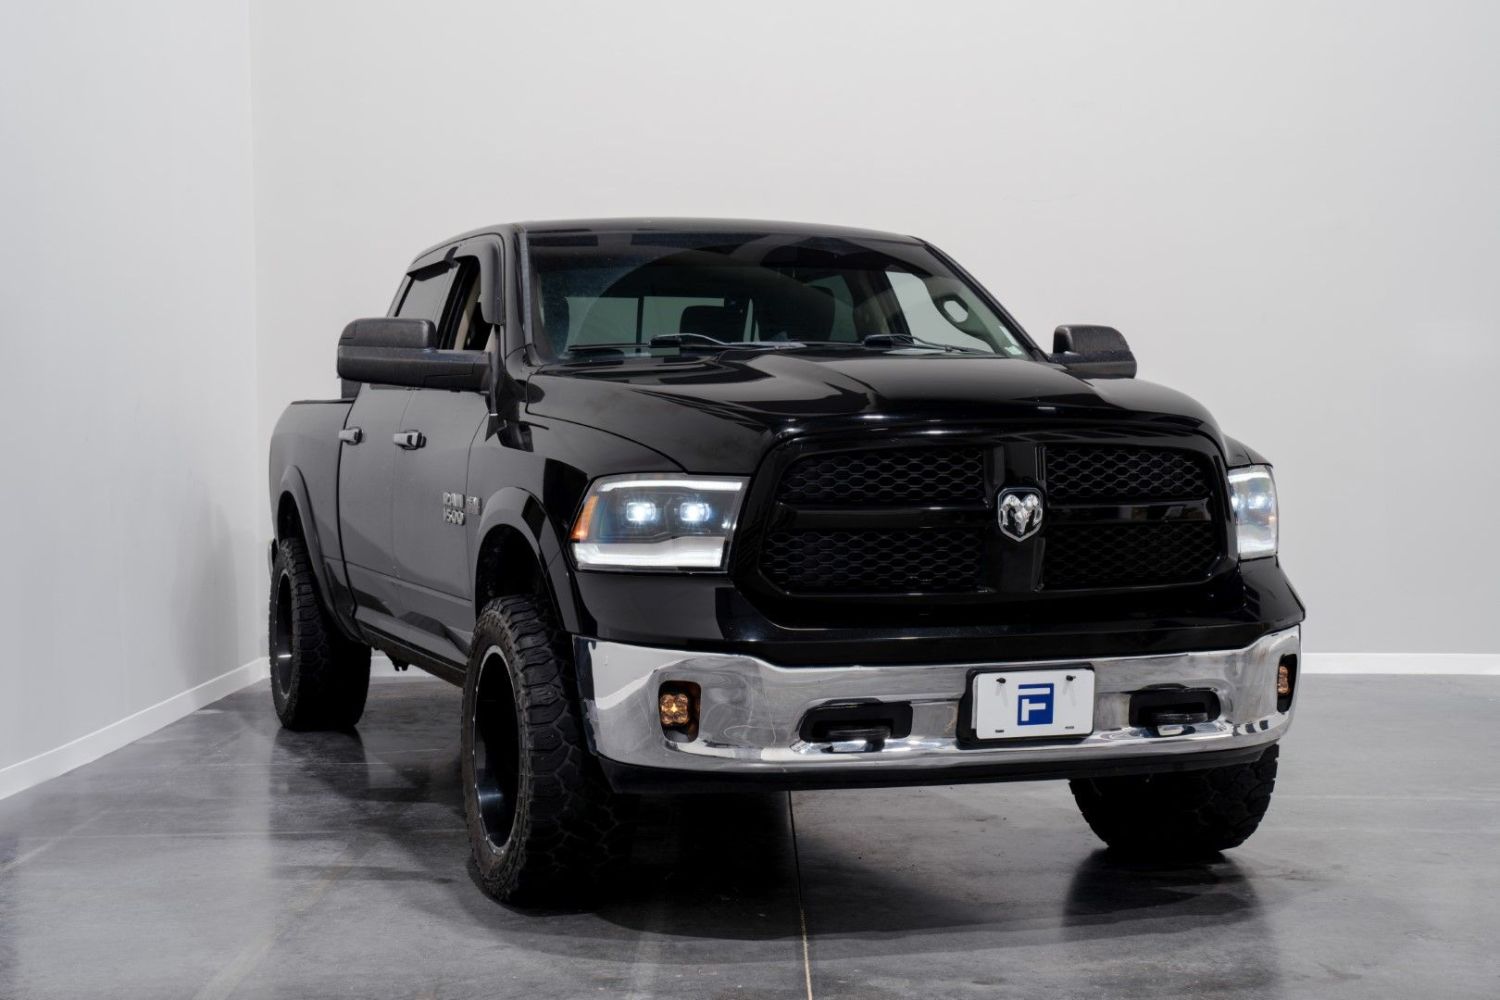 How to Install: Form Lighting 2009-2018 Ram 1500/2500/3500 LED Projector Headlights